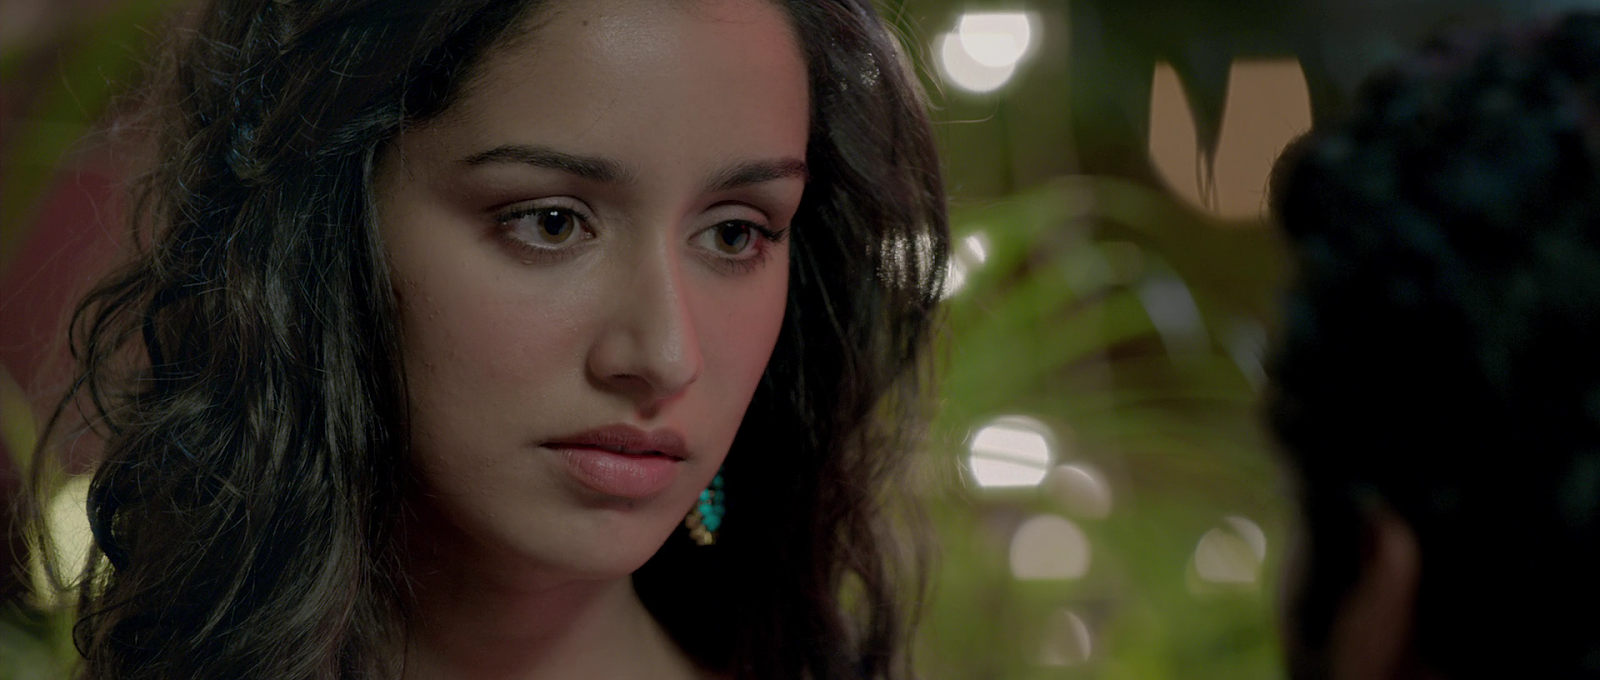 Aashiqui 2 (2013) - 1080p - BluRay - ALL VideoS [DDR 